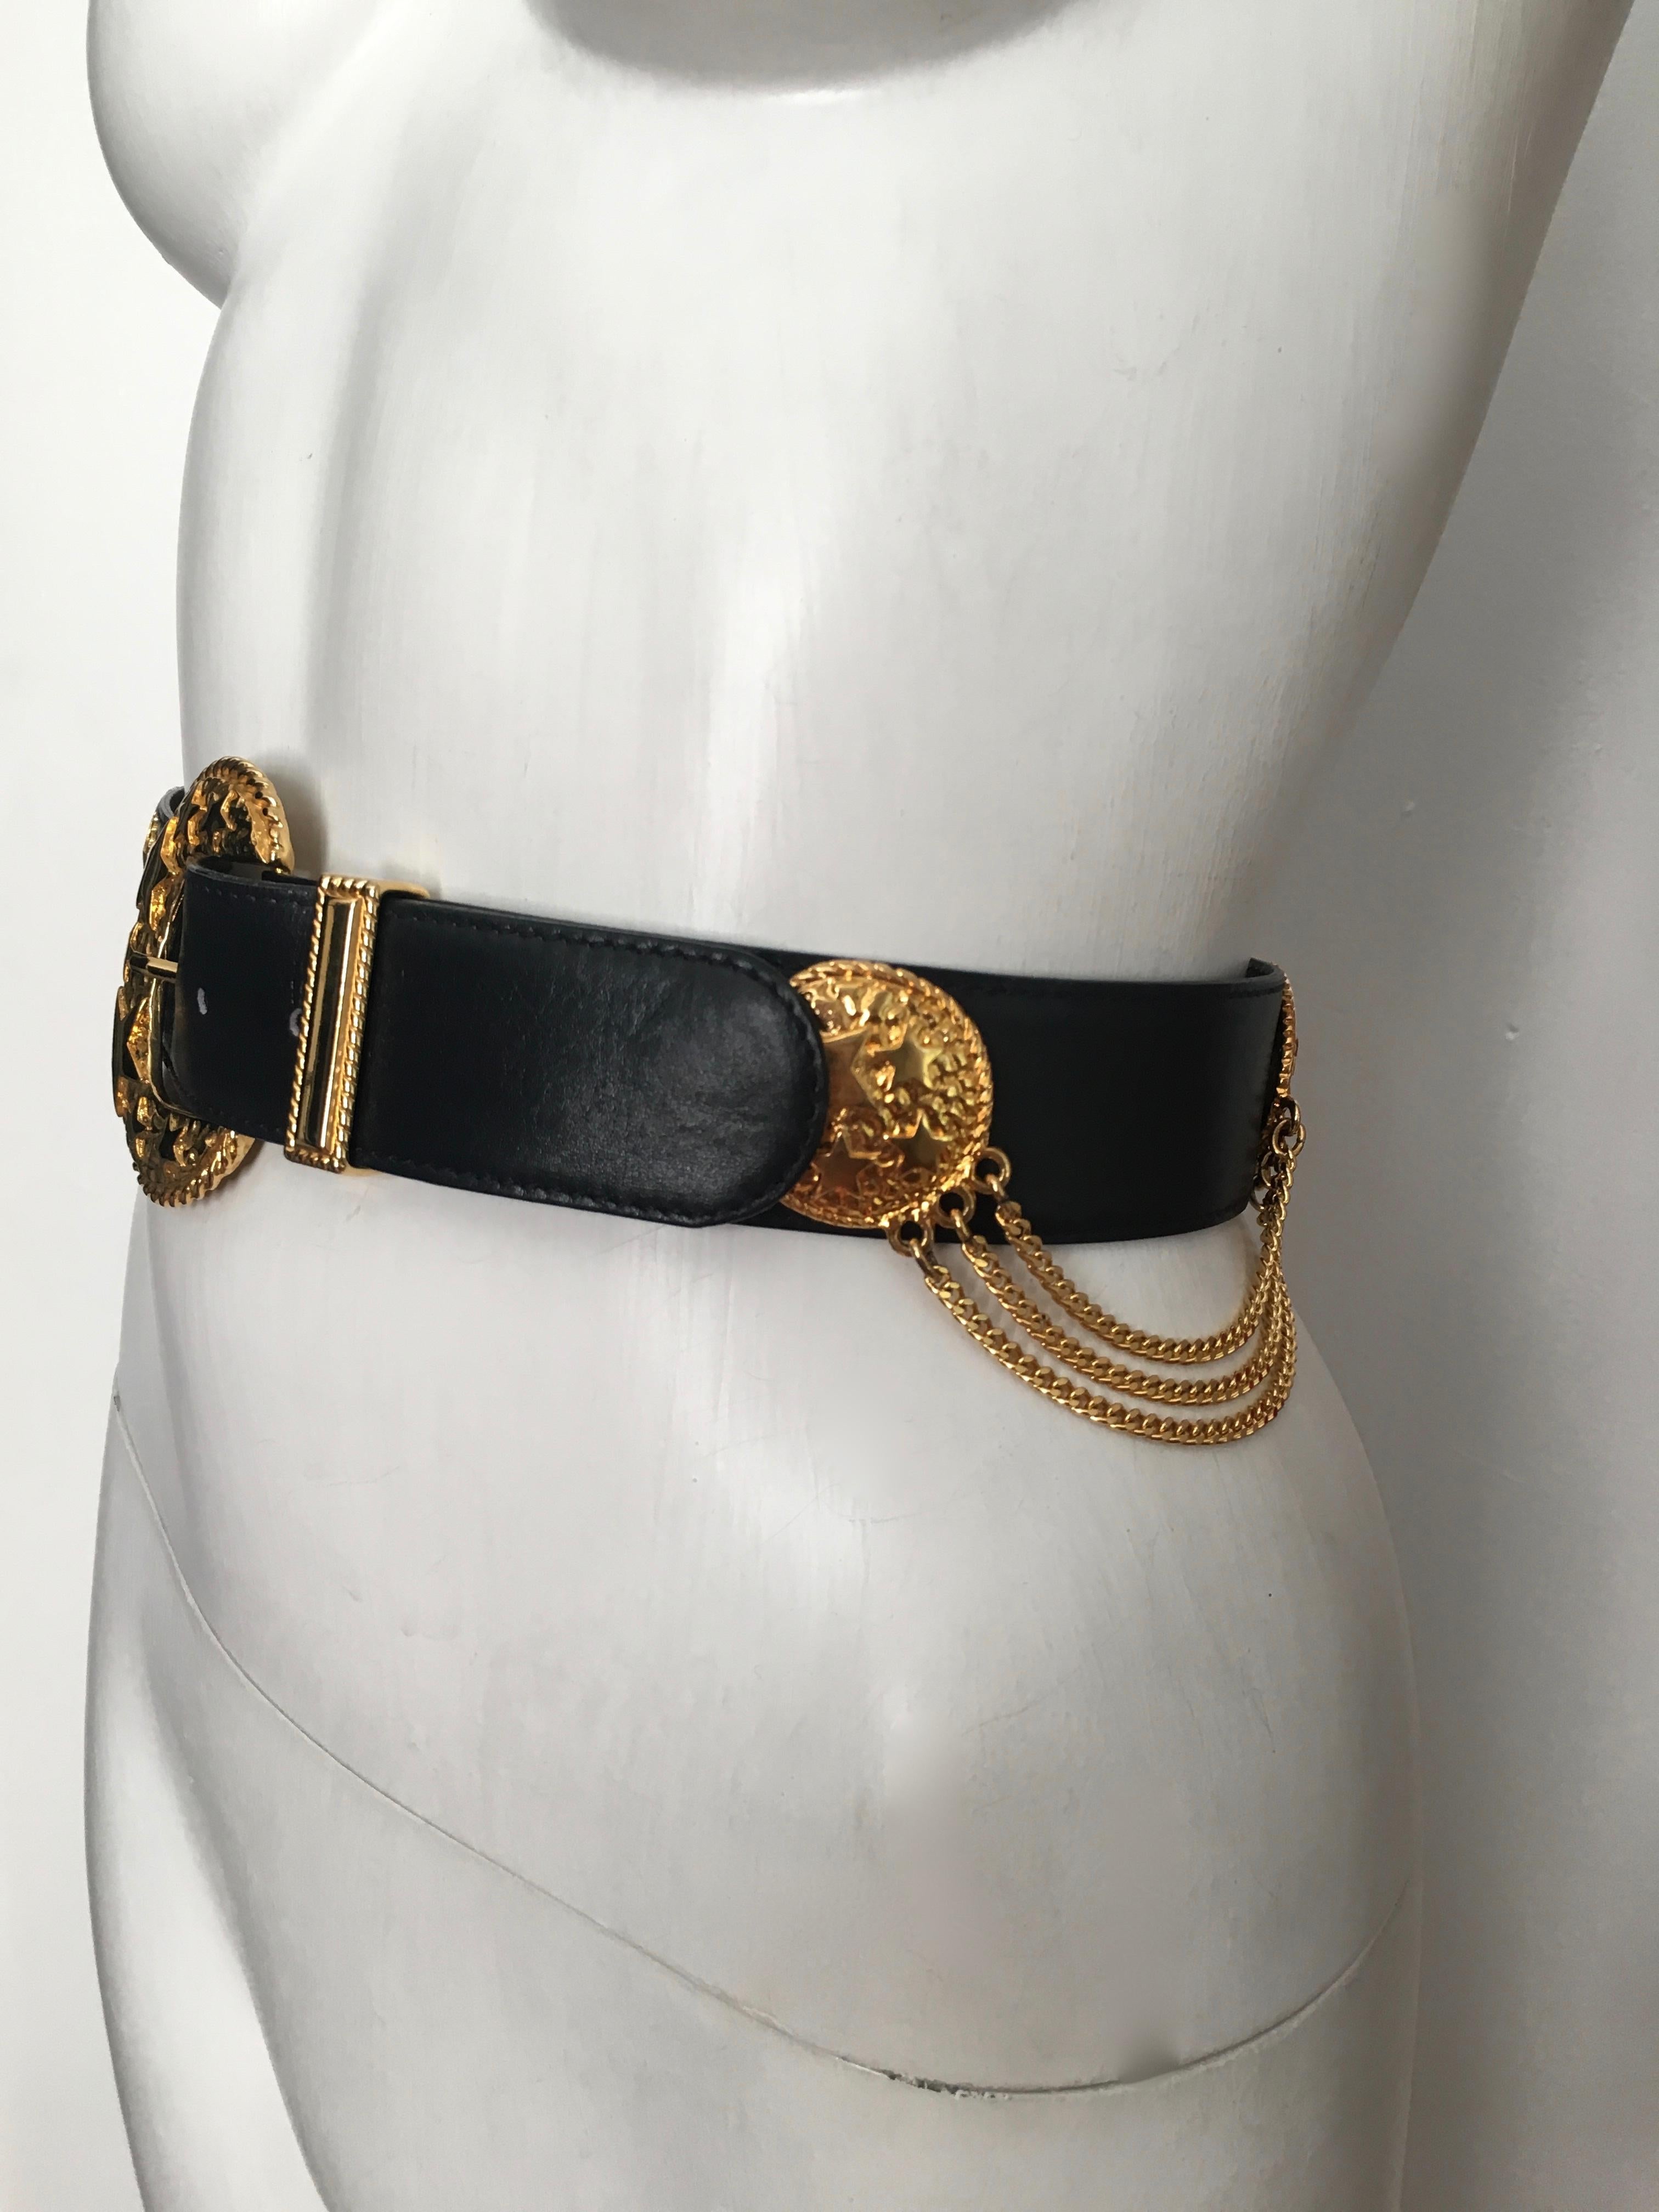 Escada 1980s black leather strap with gold 